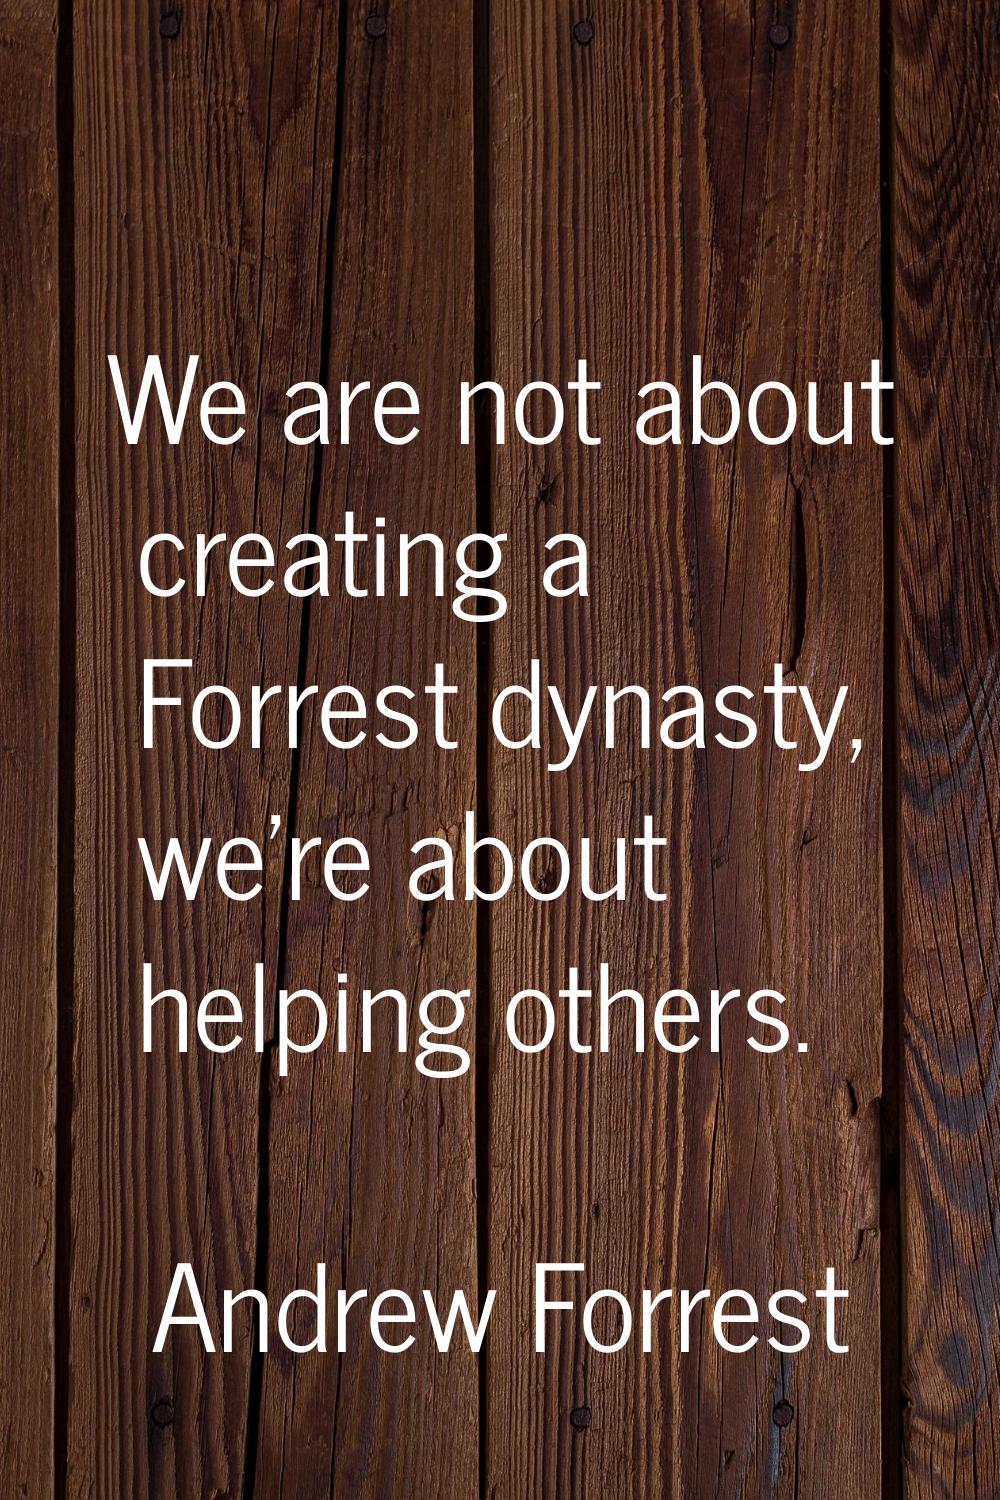 We are not about creating a Forrest dynasty, we're about helping others.